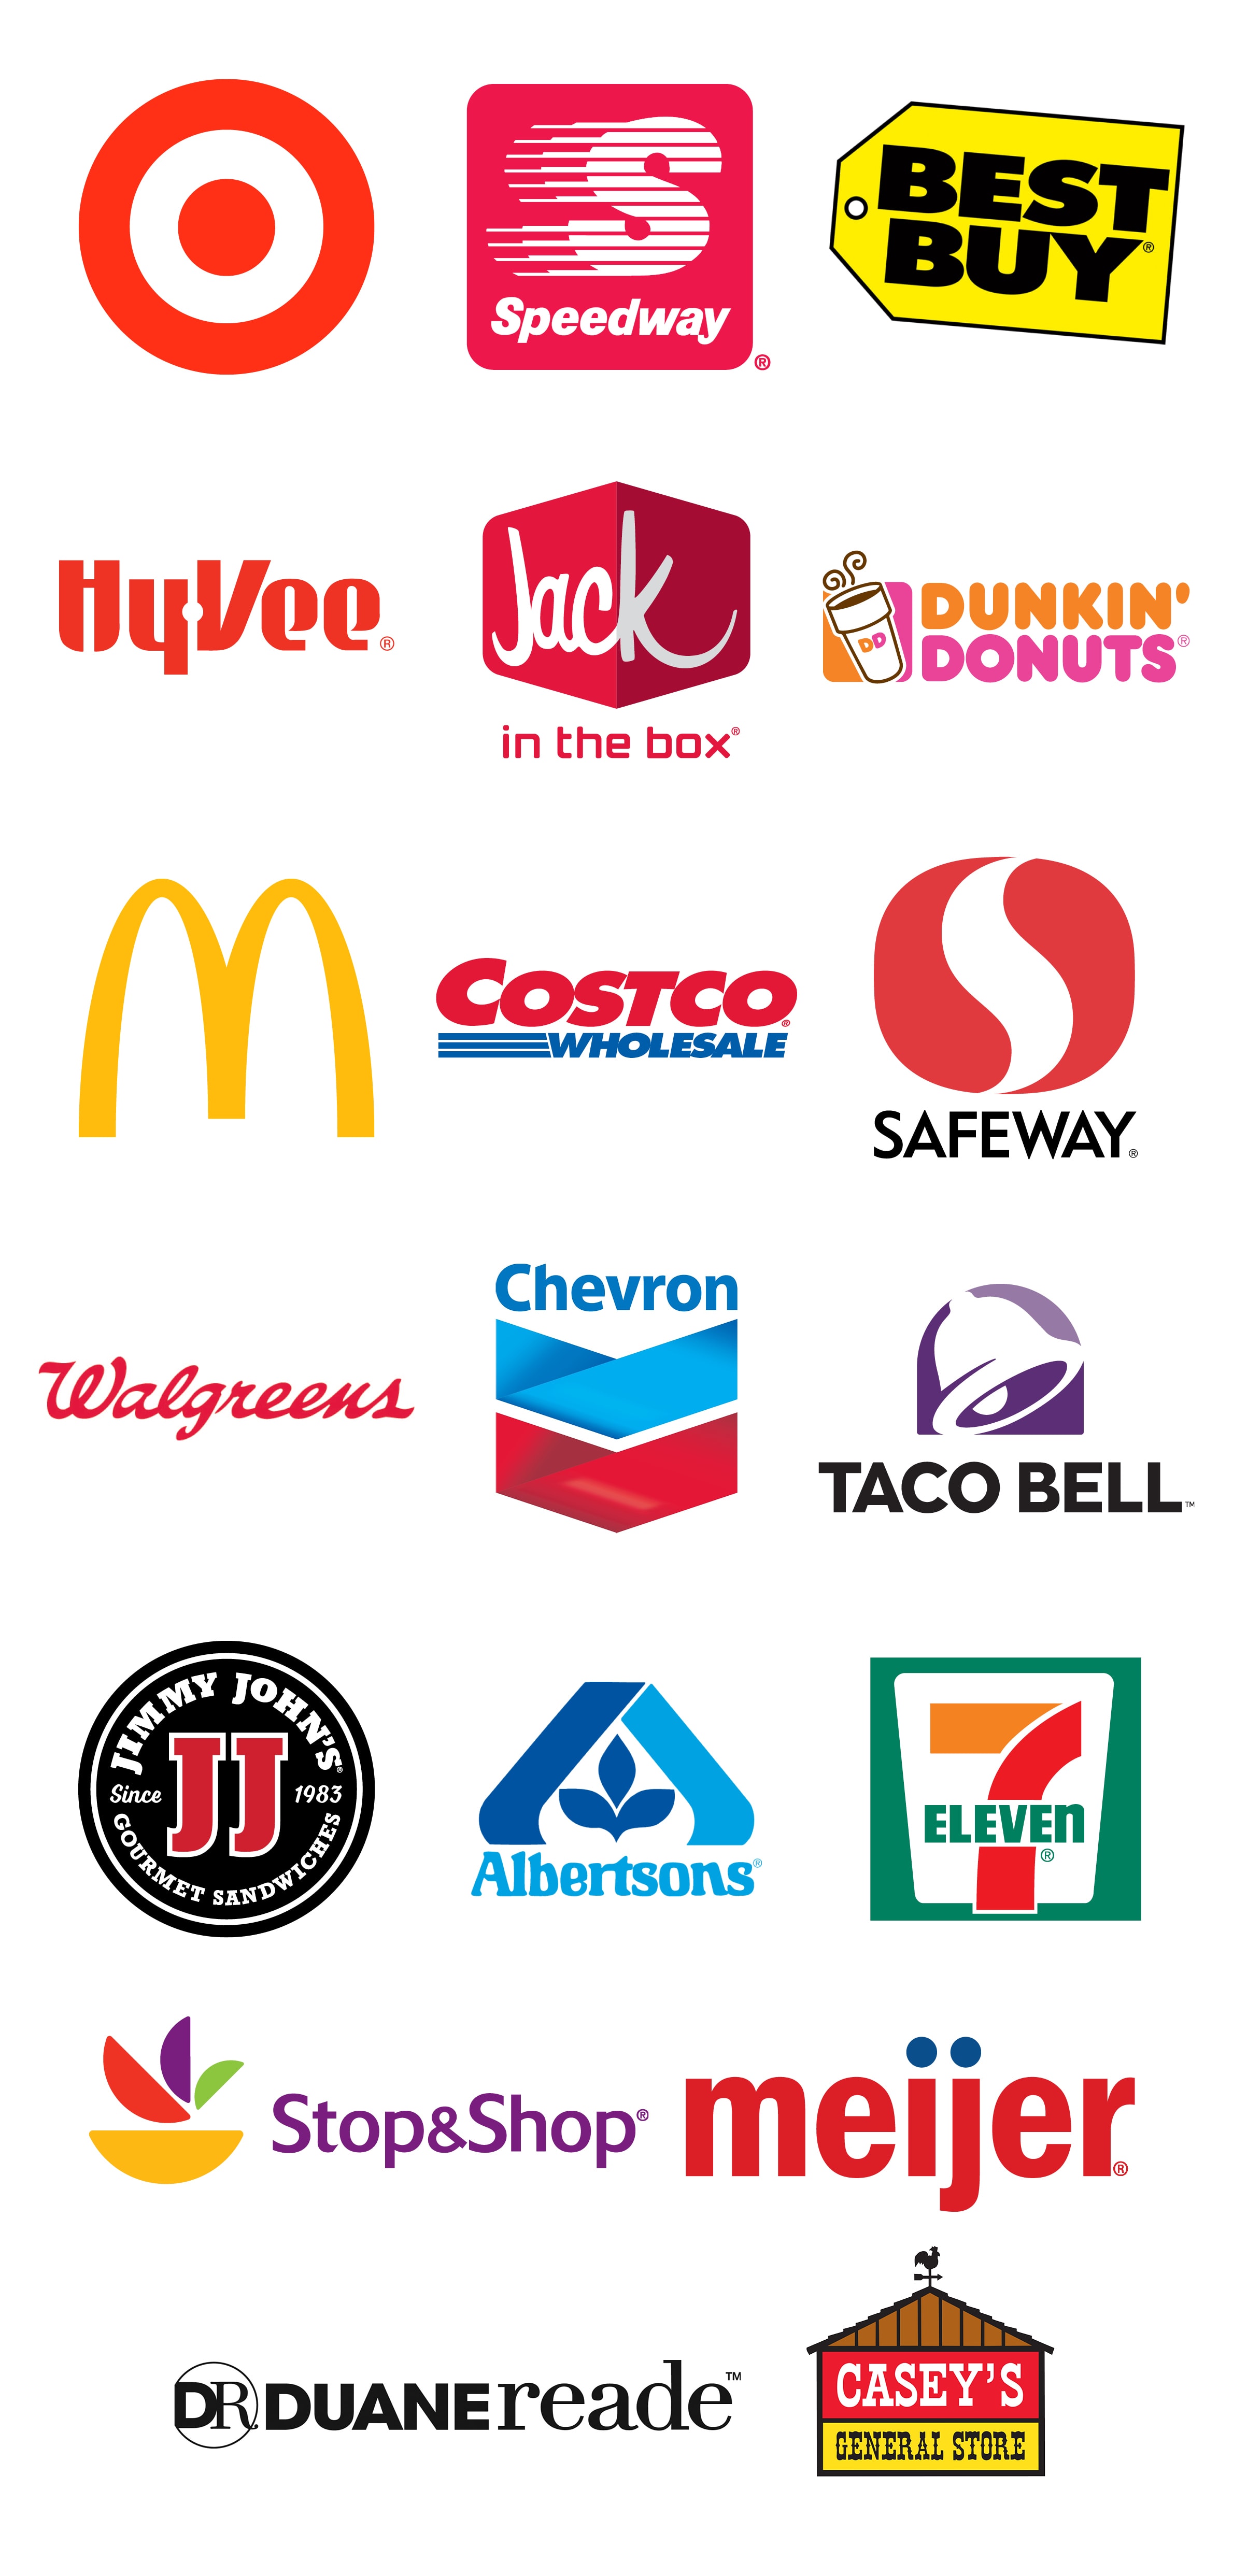 Stores / brands that accept Apple Pay in the USA